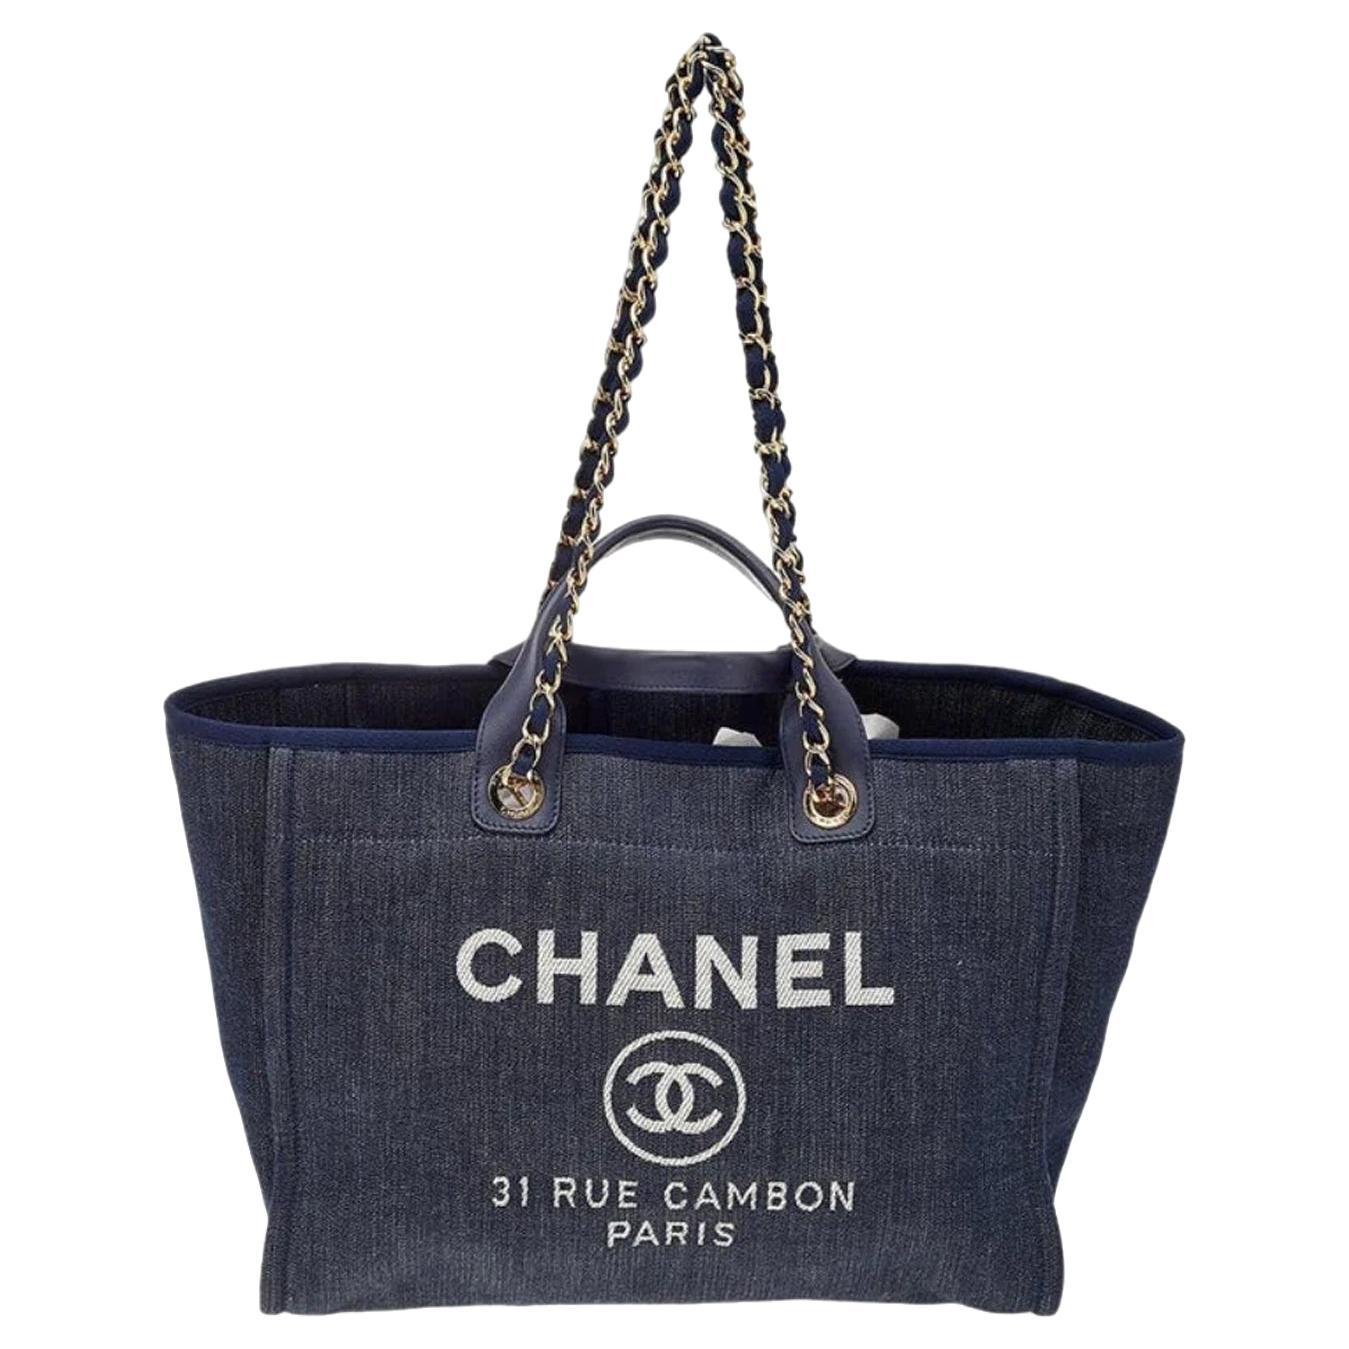 Does Chanel still make the Grand Shopping Tote?